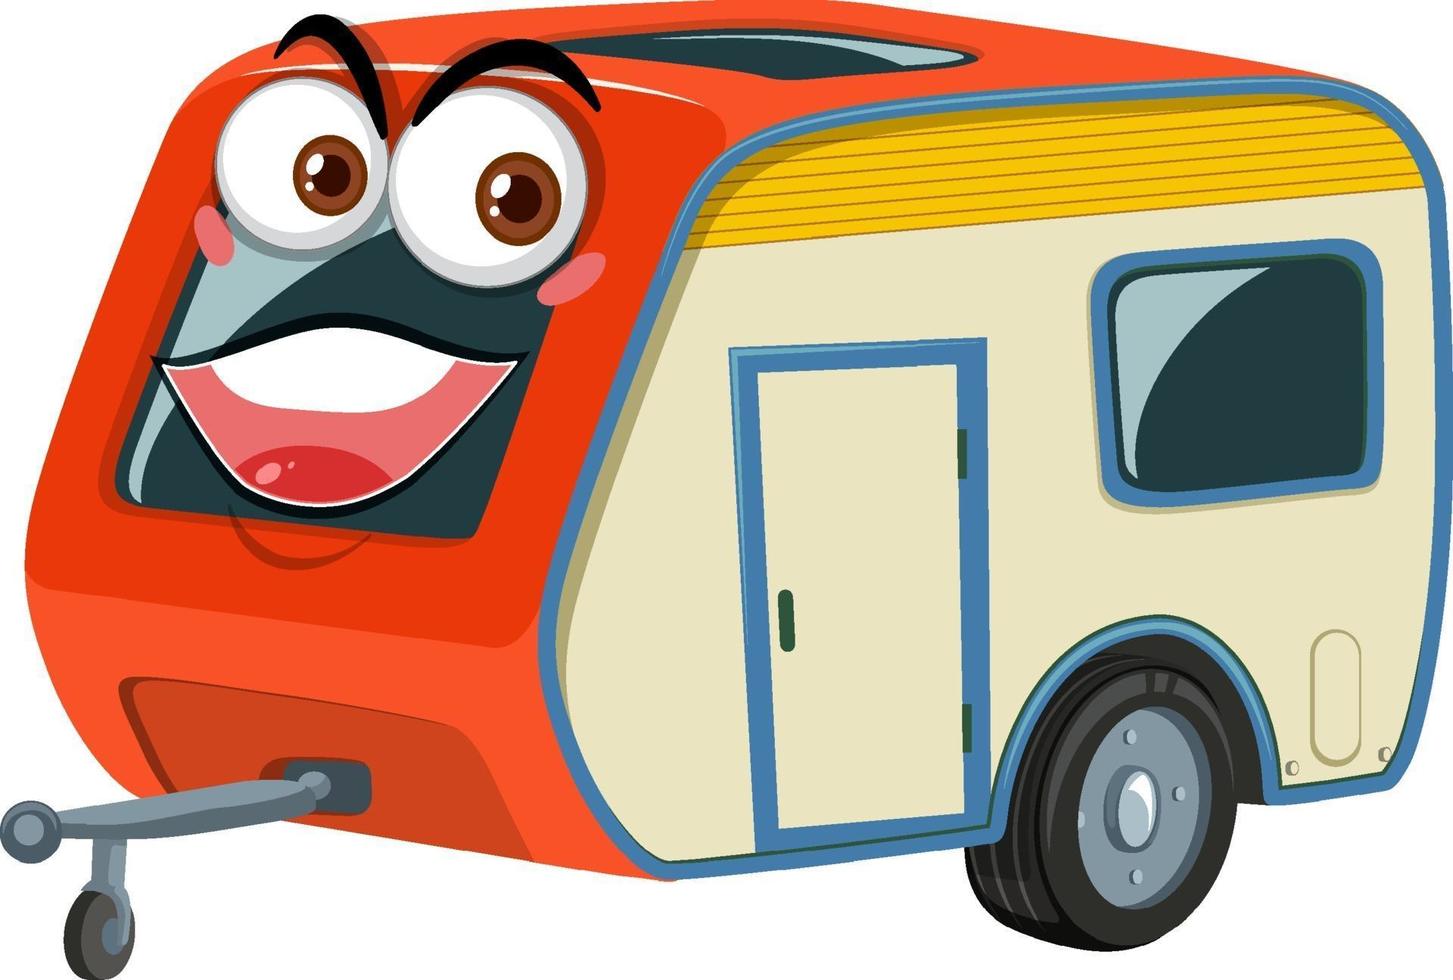 Camper trailers with face expression cartoon character on white background vector